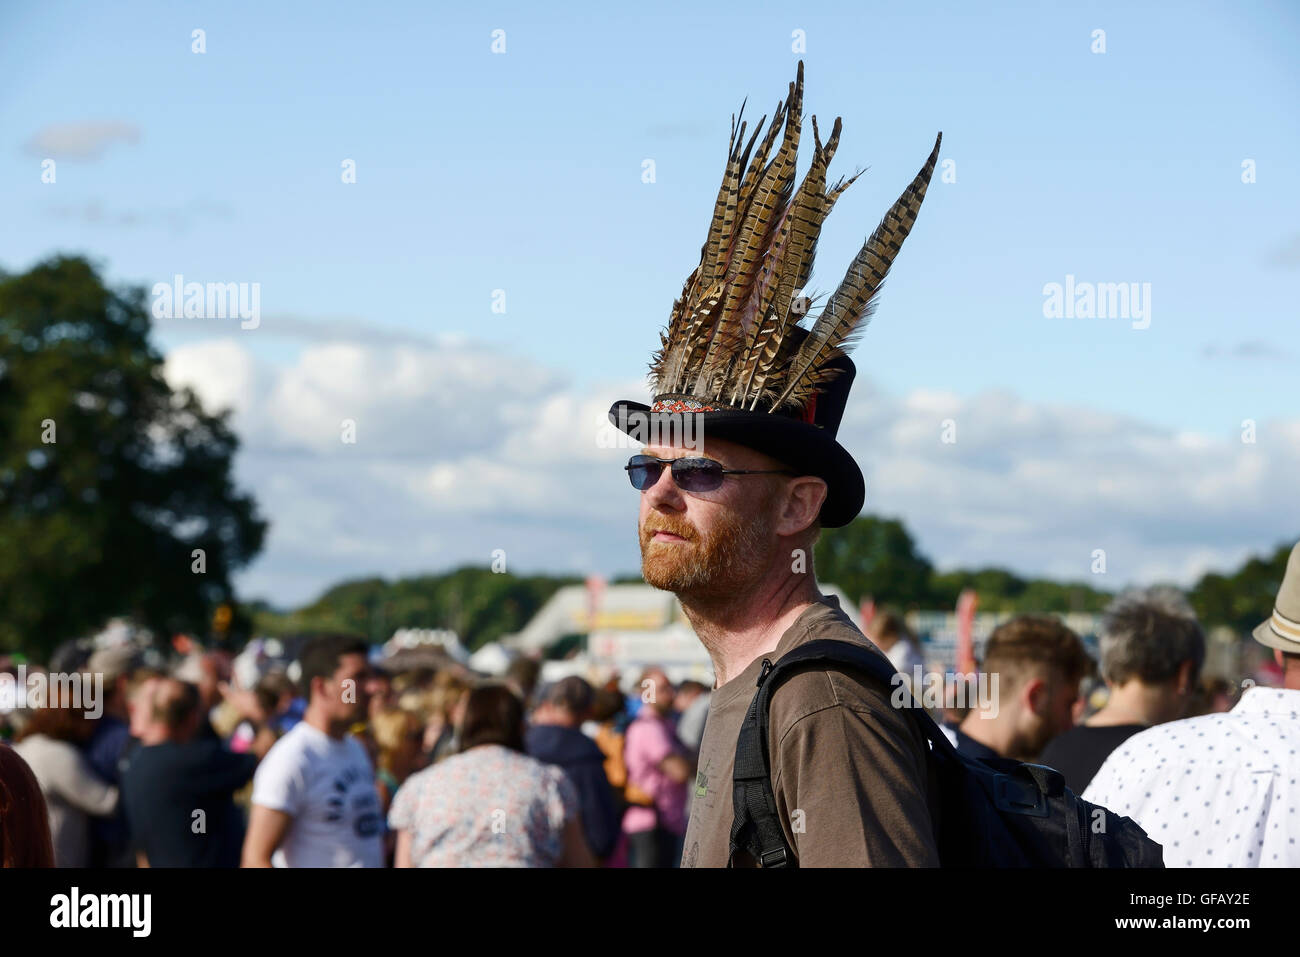 Carfest North, Bolesworth, Cheshire, UK. 30th July 2016. A man with feathers in his hat. The event is the brainchild of Chris Evans and features 3 days of cars, music and entertainment with profits being donated to the charity Children in Need. Andrew Paterson/Alamy Live News Stock Photo